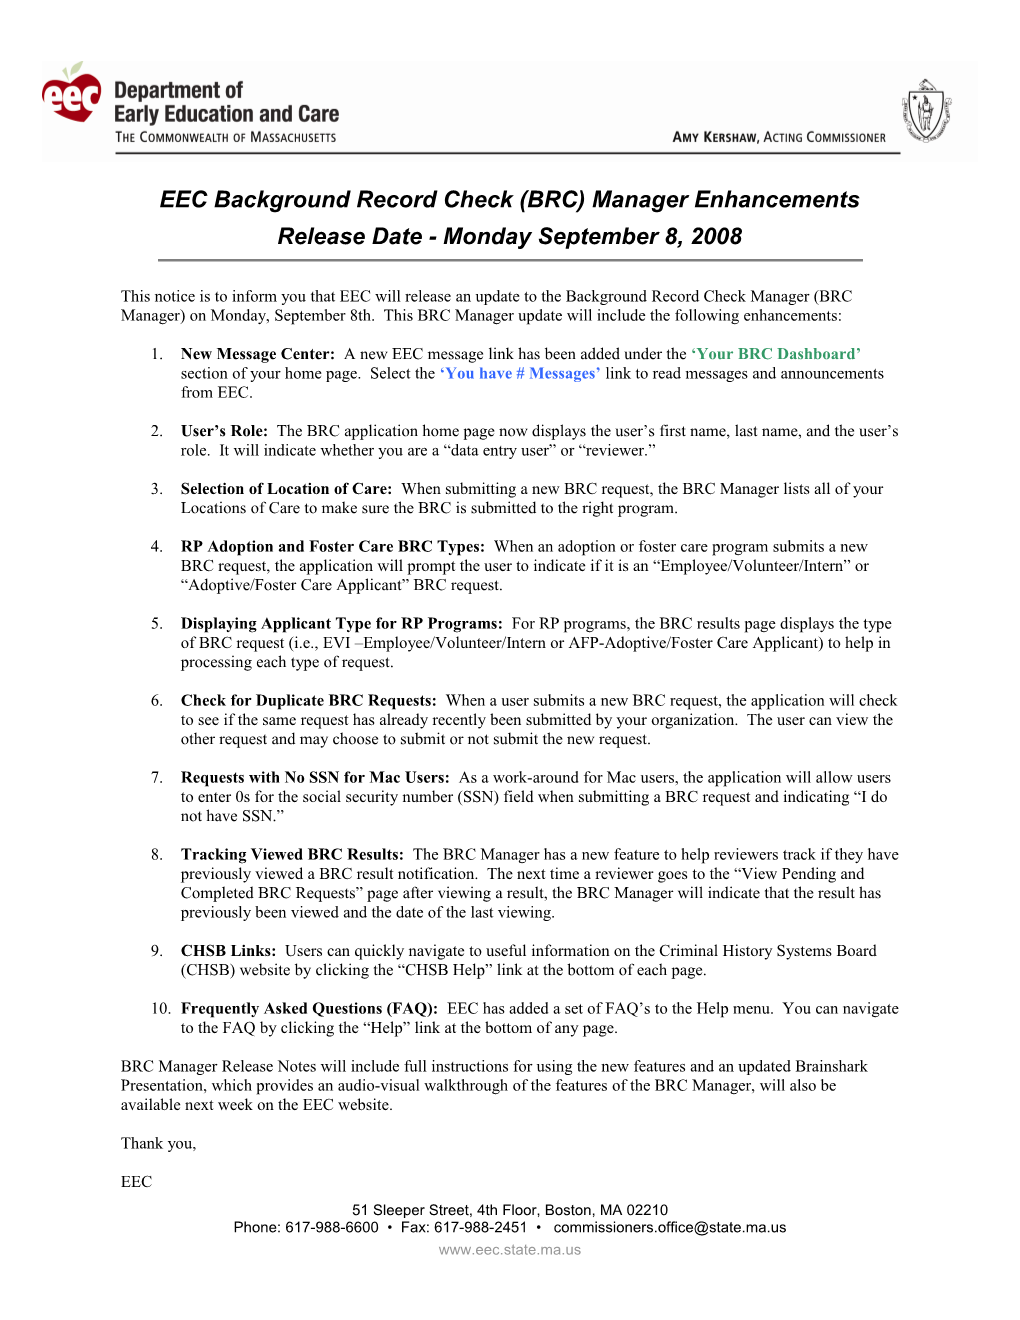 EEC Background Record Check (BRC) Manager Enhancements